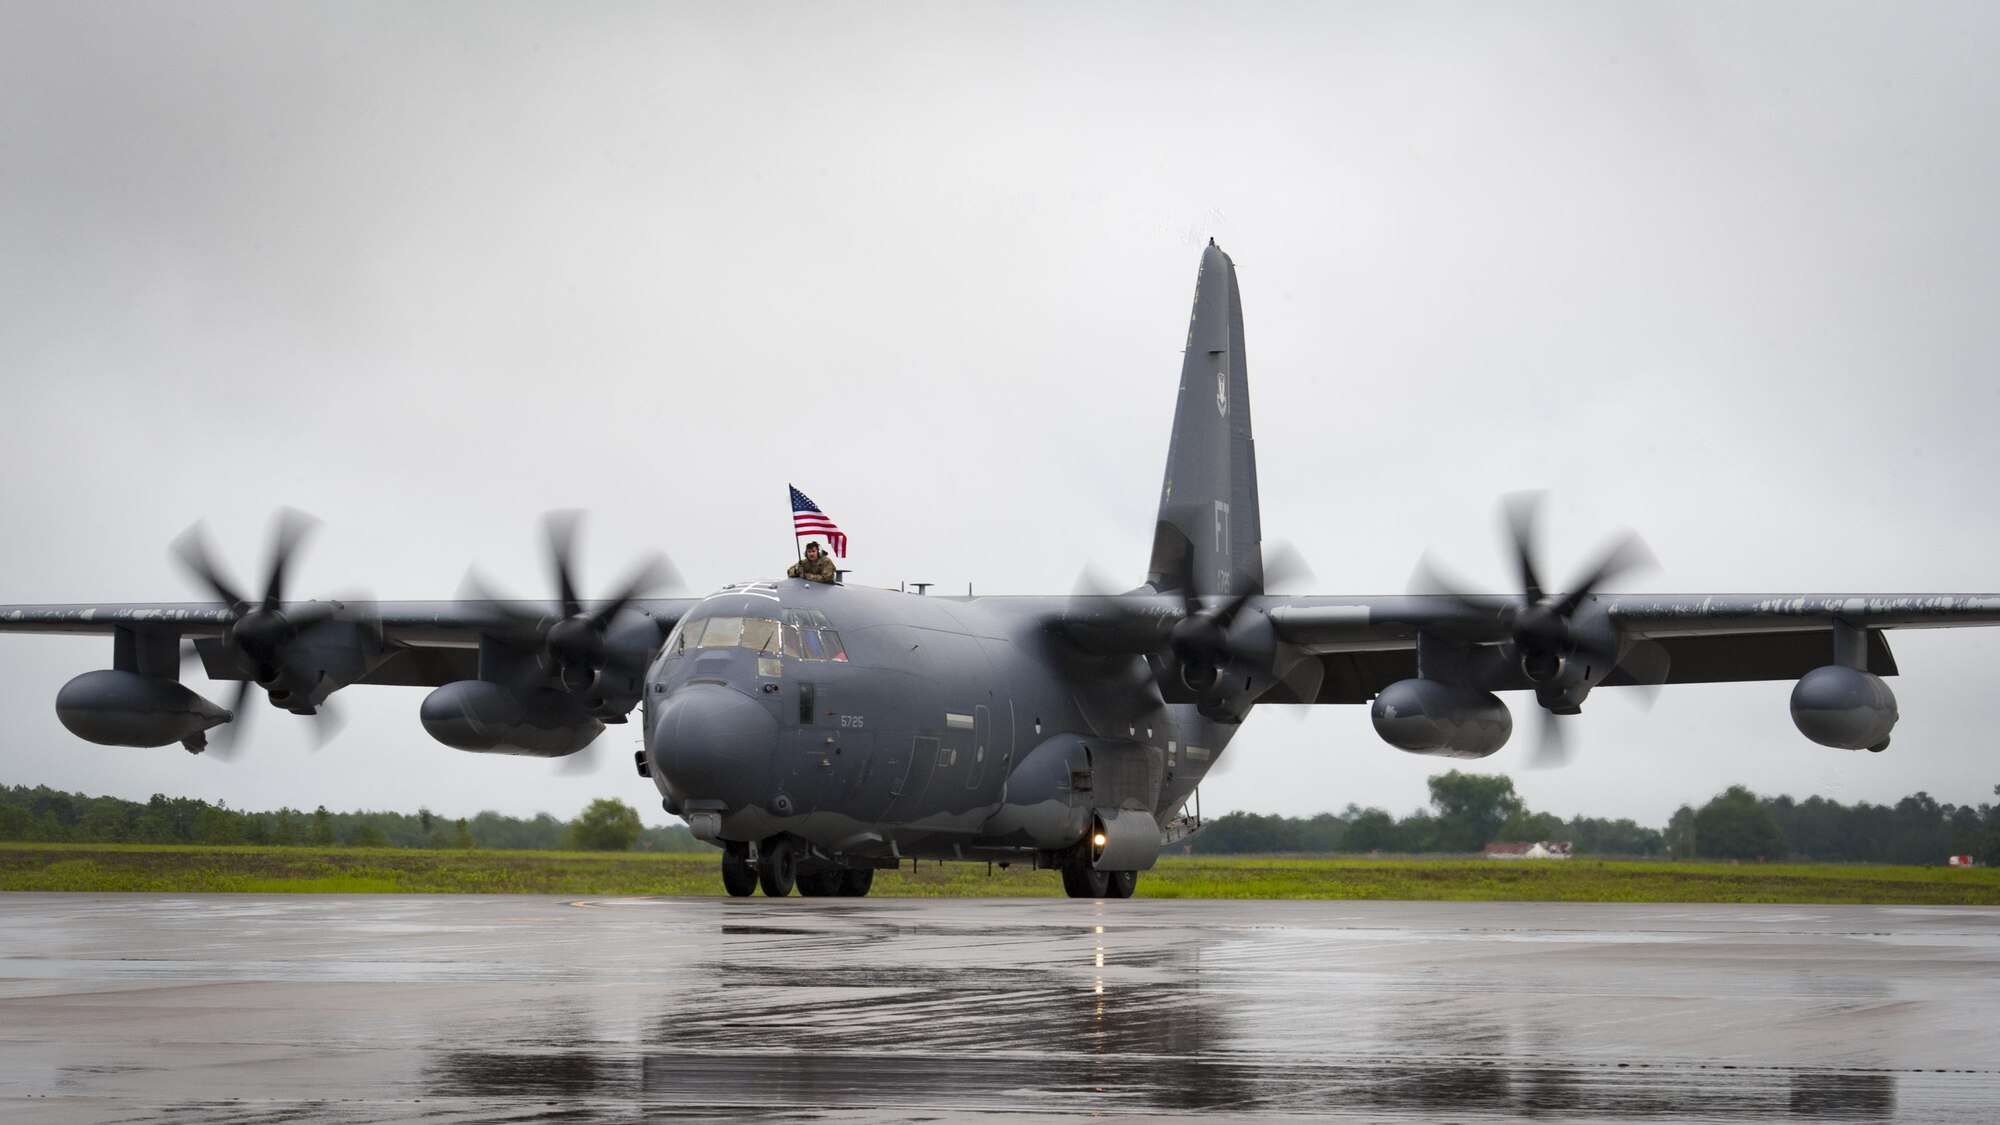 An Airman holds an American flag as a HC-130J Combat King II taxis on the flightline during a redeployment, June 6, 2017, at Moody Air Force Base, Ga. The 41st and 71st Rescue Squadrons were recently deployed to Southwest Asia where they provided combat search and rescue capabilities in support of Operation Inherent Resolve. (U.S. Air Force photo by Airman 1st Class Lauren M. Sprunk)